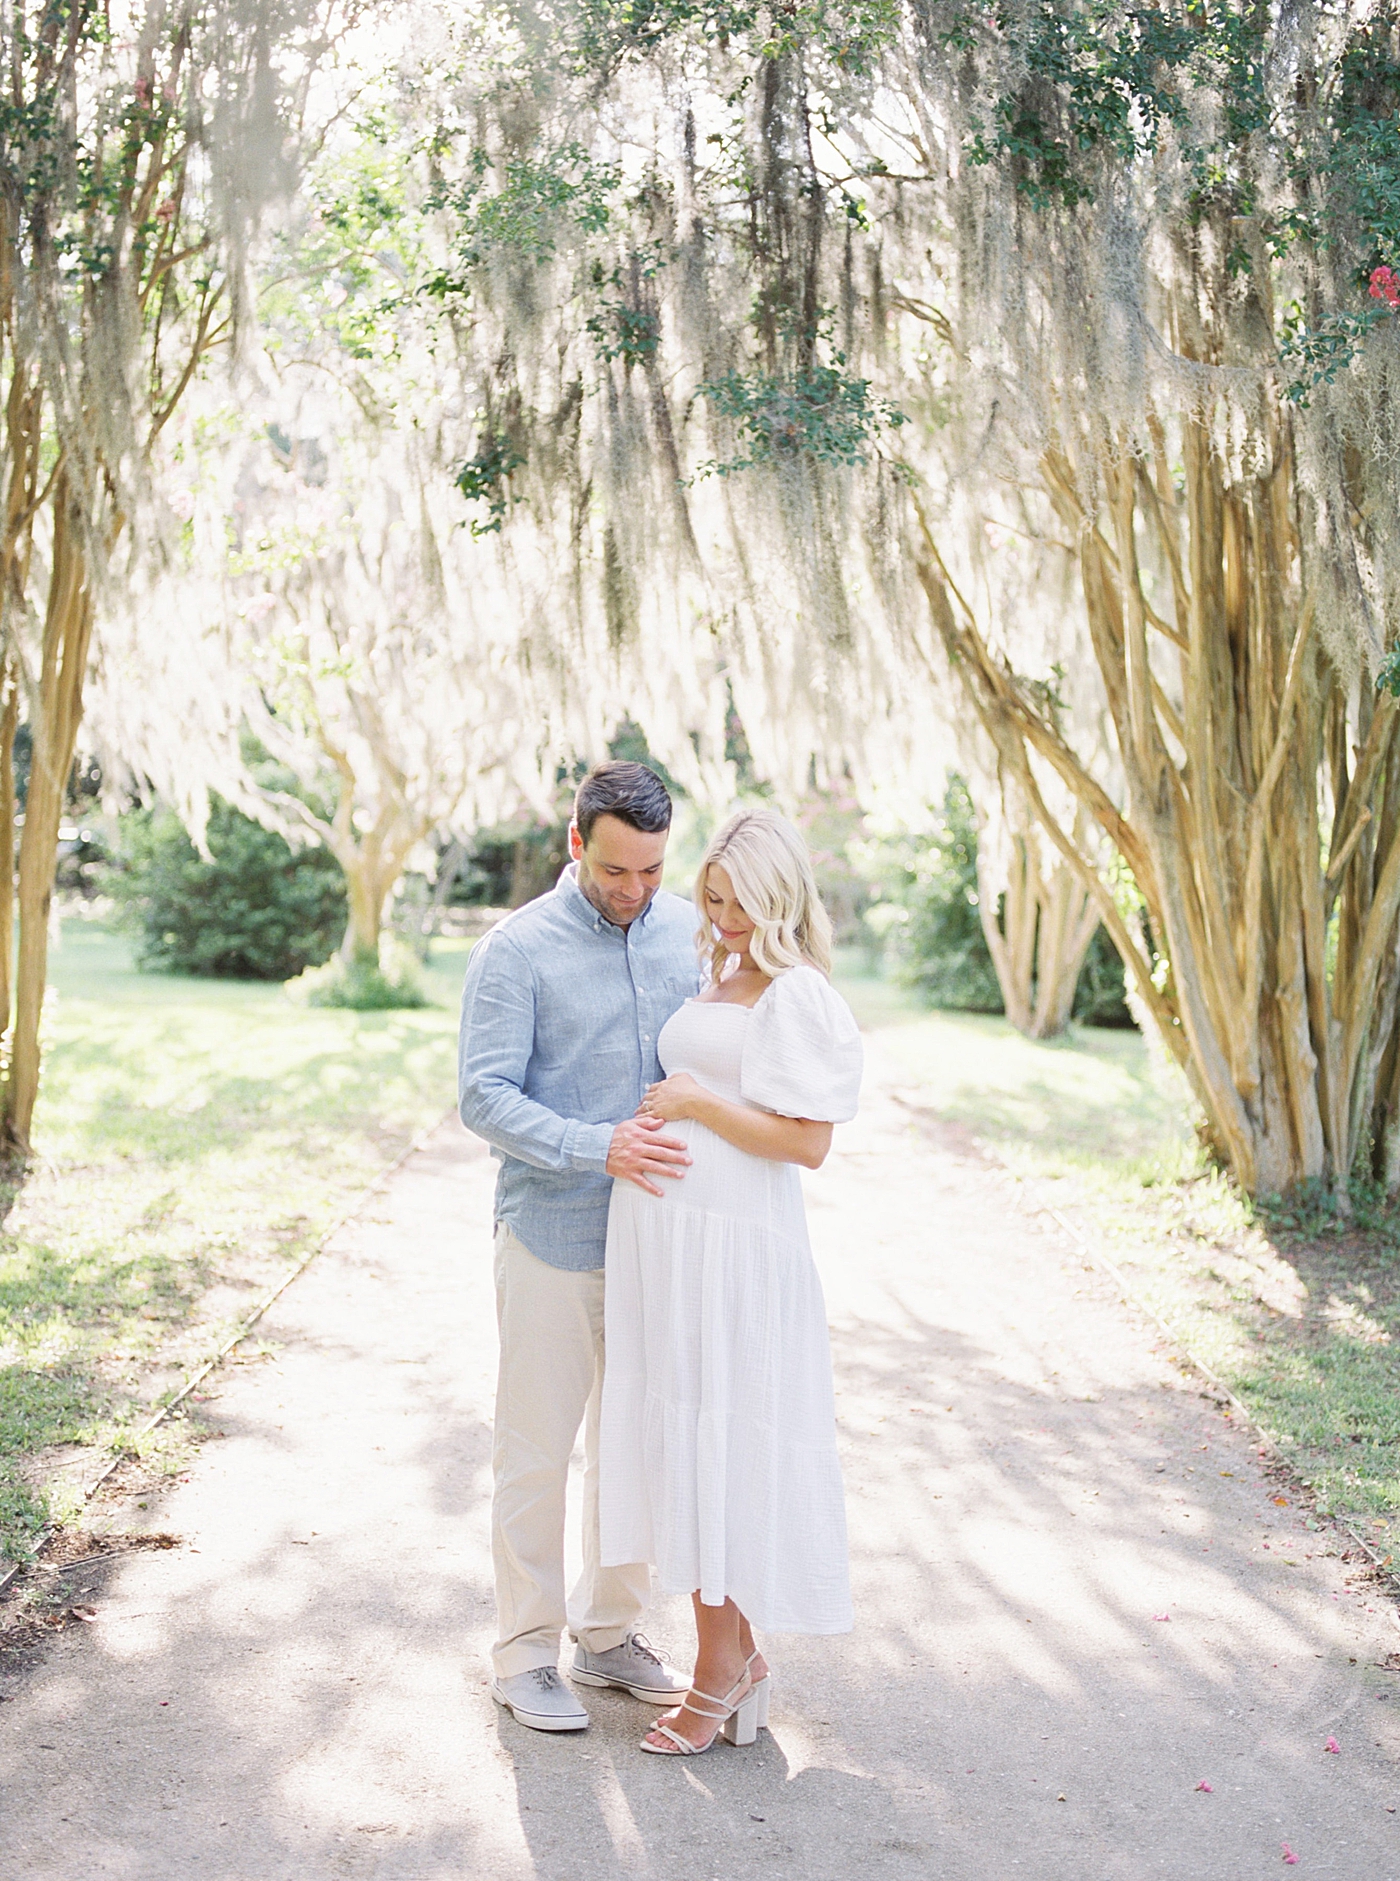 Mom and dad snuggling under Spanish moss covered path | Dad's Wardrobe Fall Sessions with Caitlyn Motycka Photography